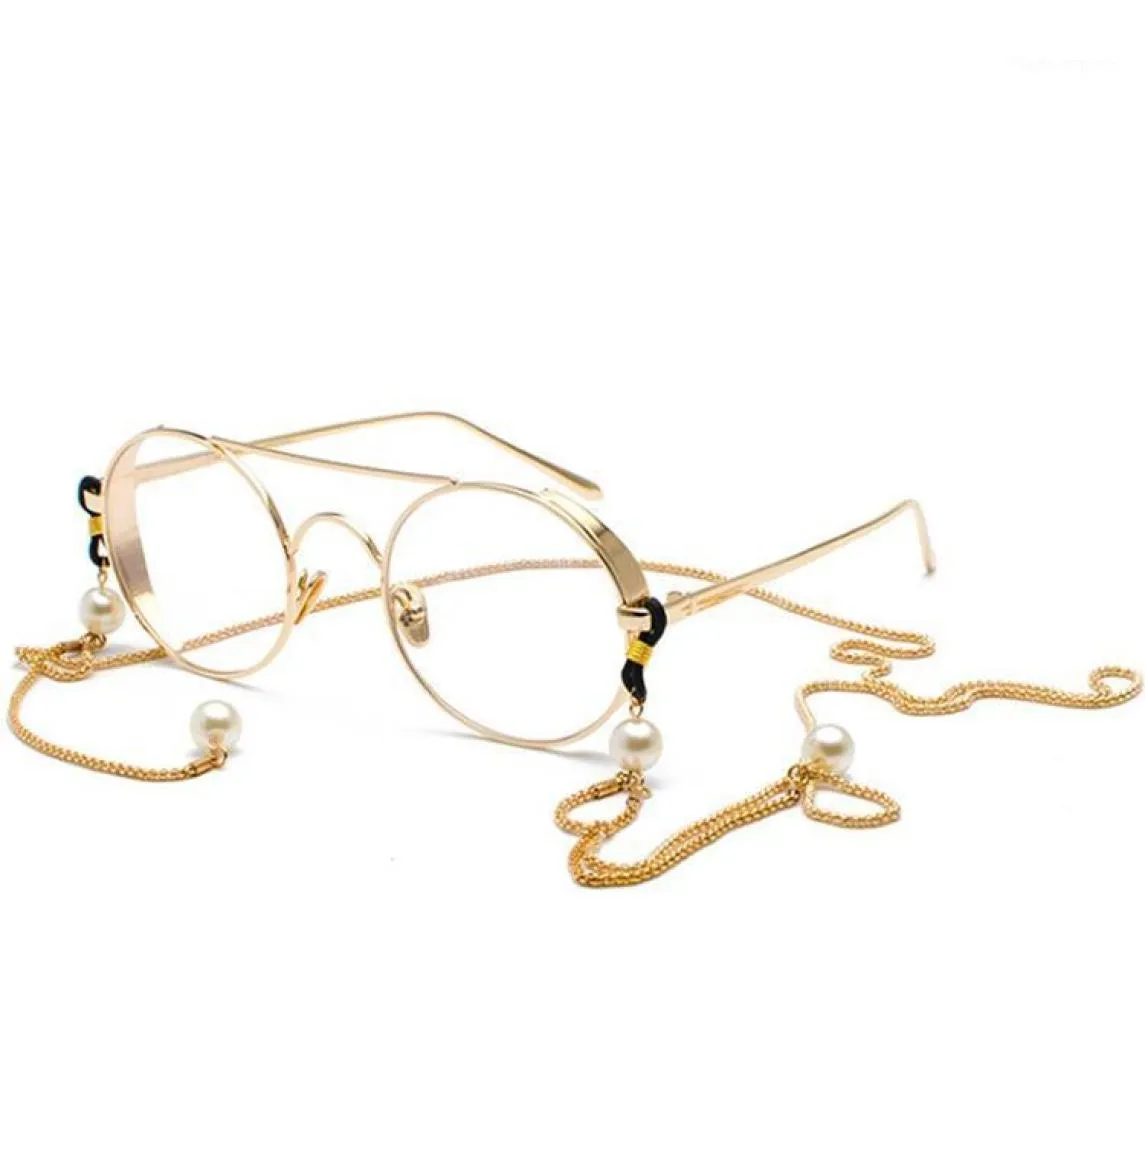 Retro Round Metal Glasses Frame Flat Mirror With Chain Pearl Chain Holder Cord Lanyard Necklace Glasses Halter17650090